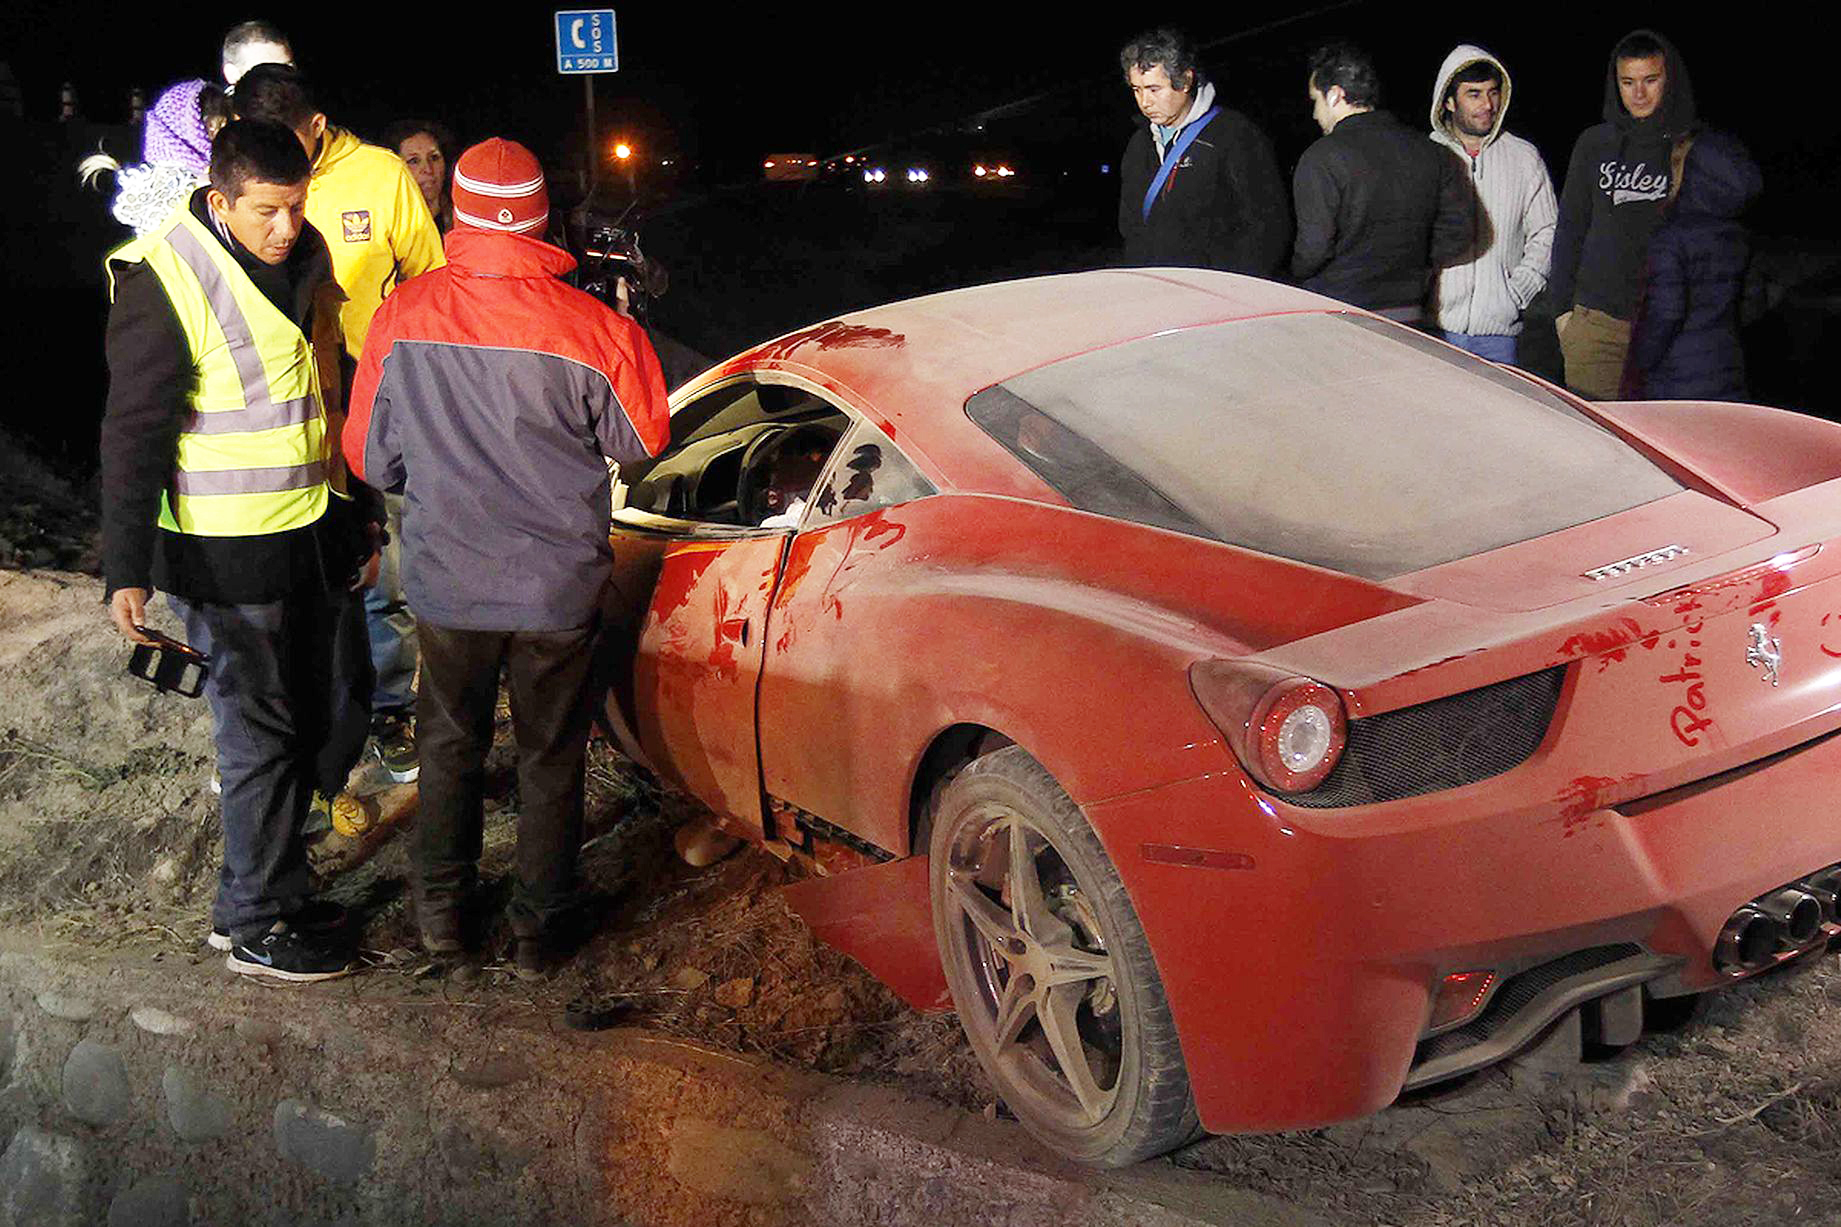 A-red-Ferrari-belonging-to-Arturo-Vidal-is-seen-after-a-car-crash-on-a-highway-south-of-Santiago (3)